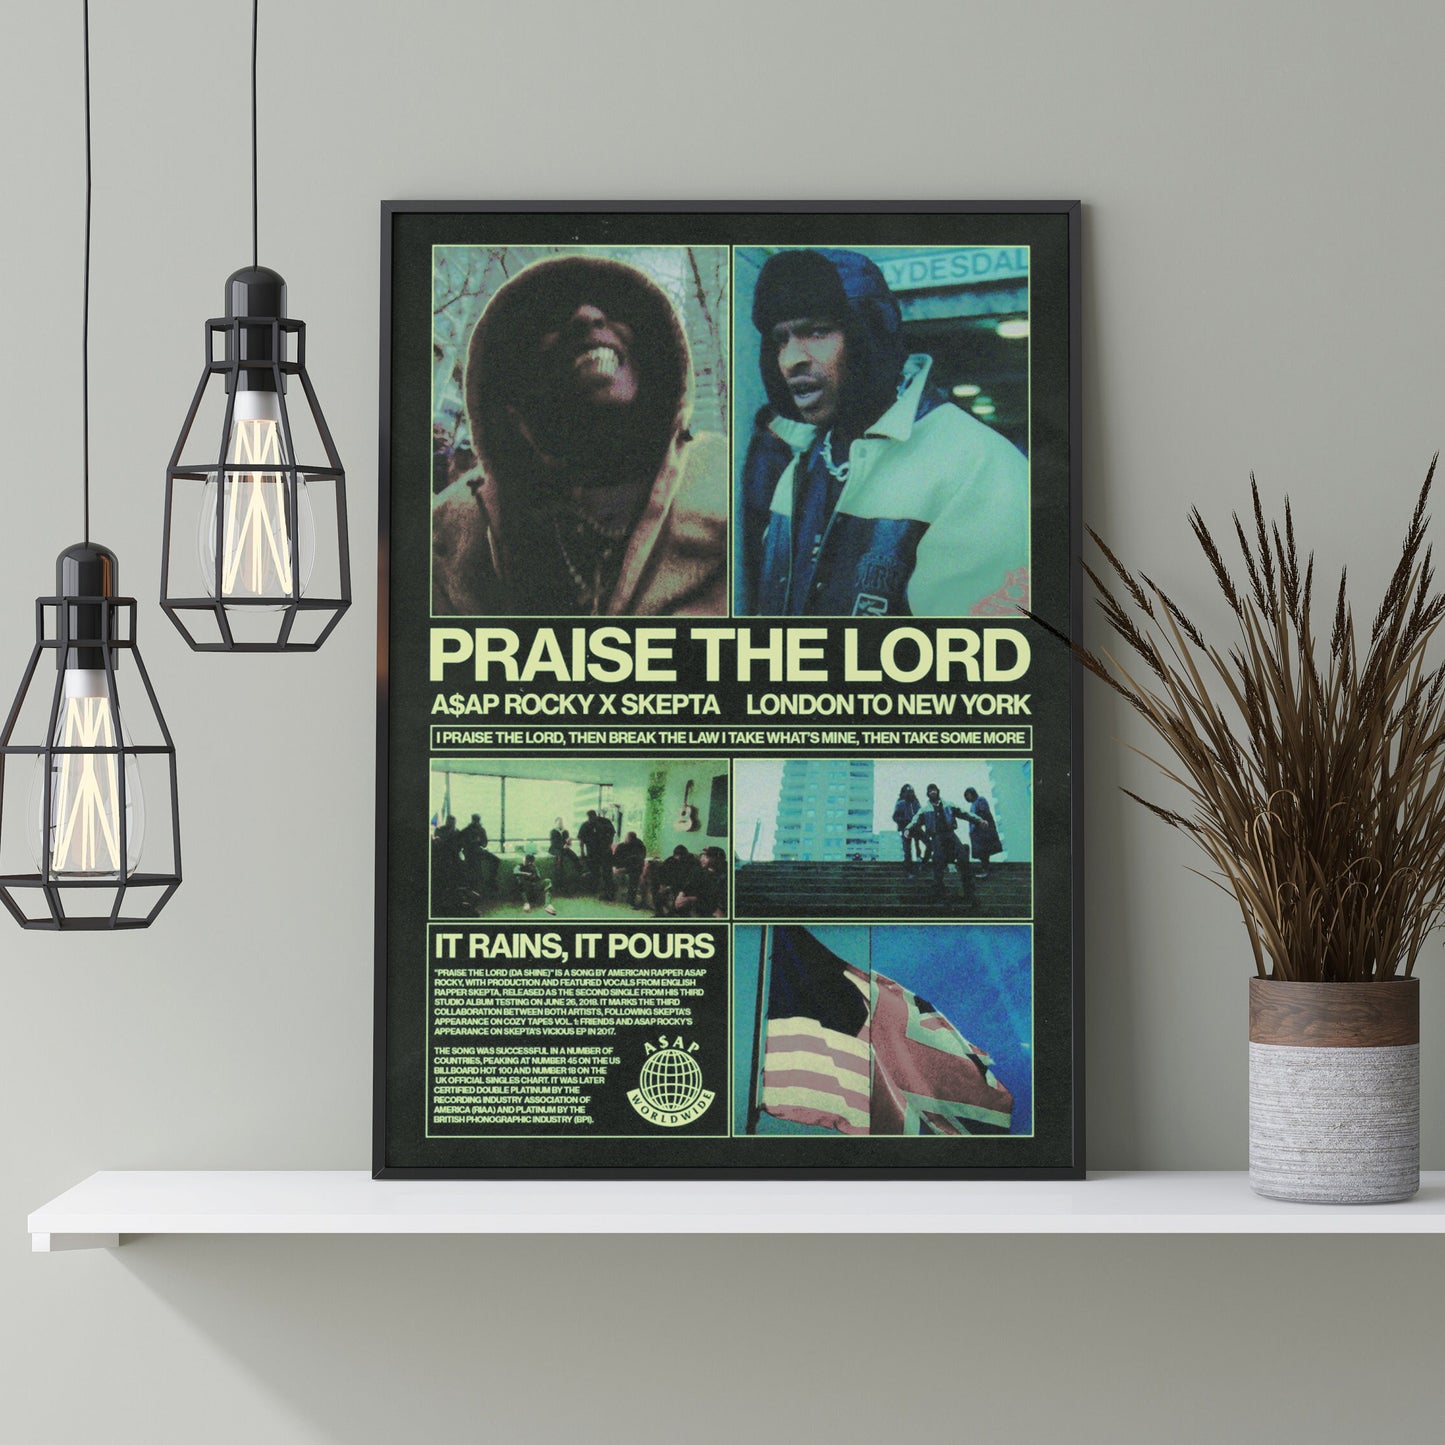 PRAISE THE LORD POSTER